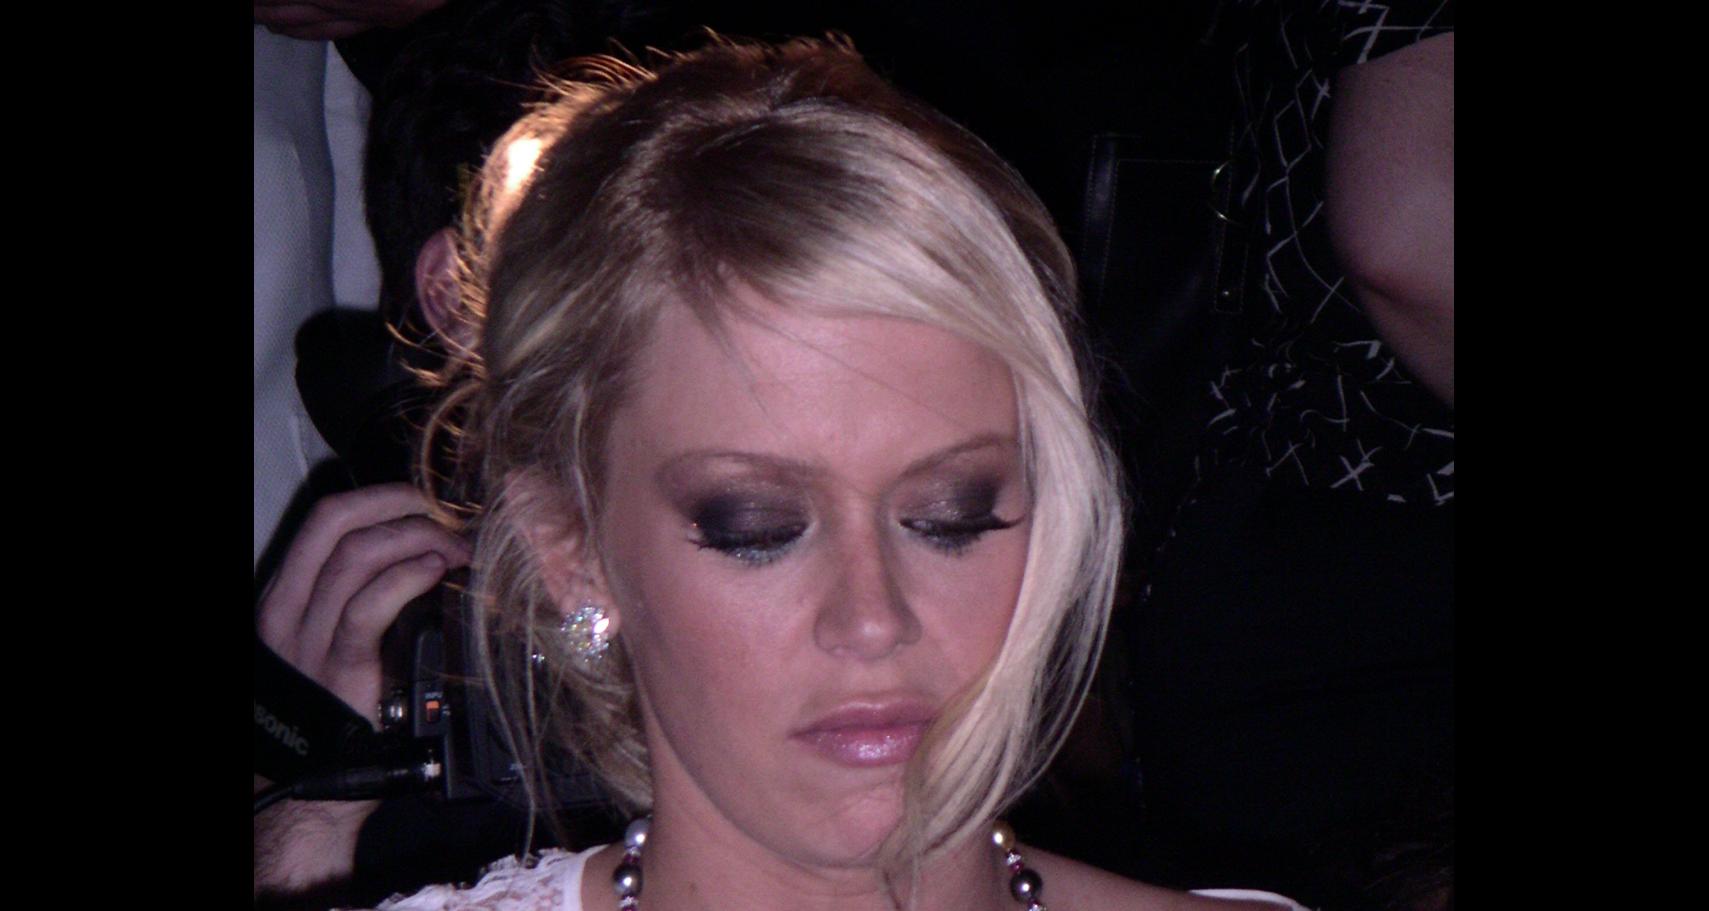 Jenna Jameson Launches Online Support Group for Sober Women